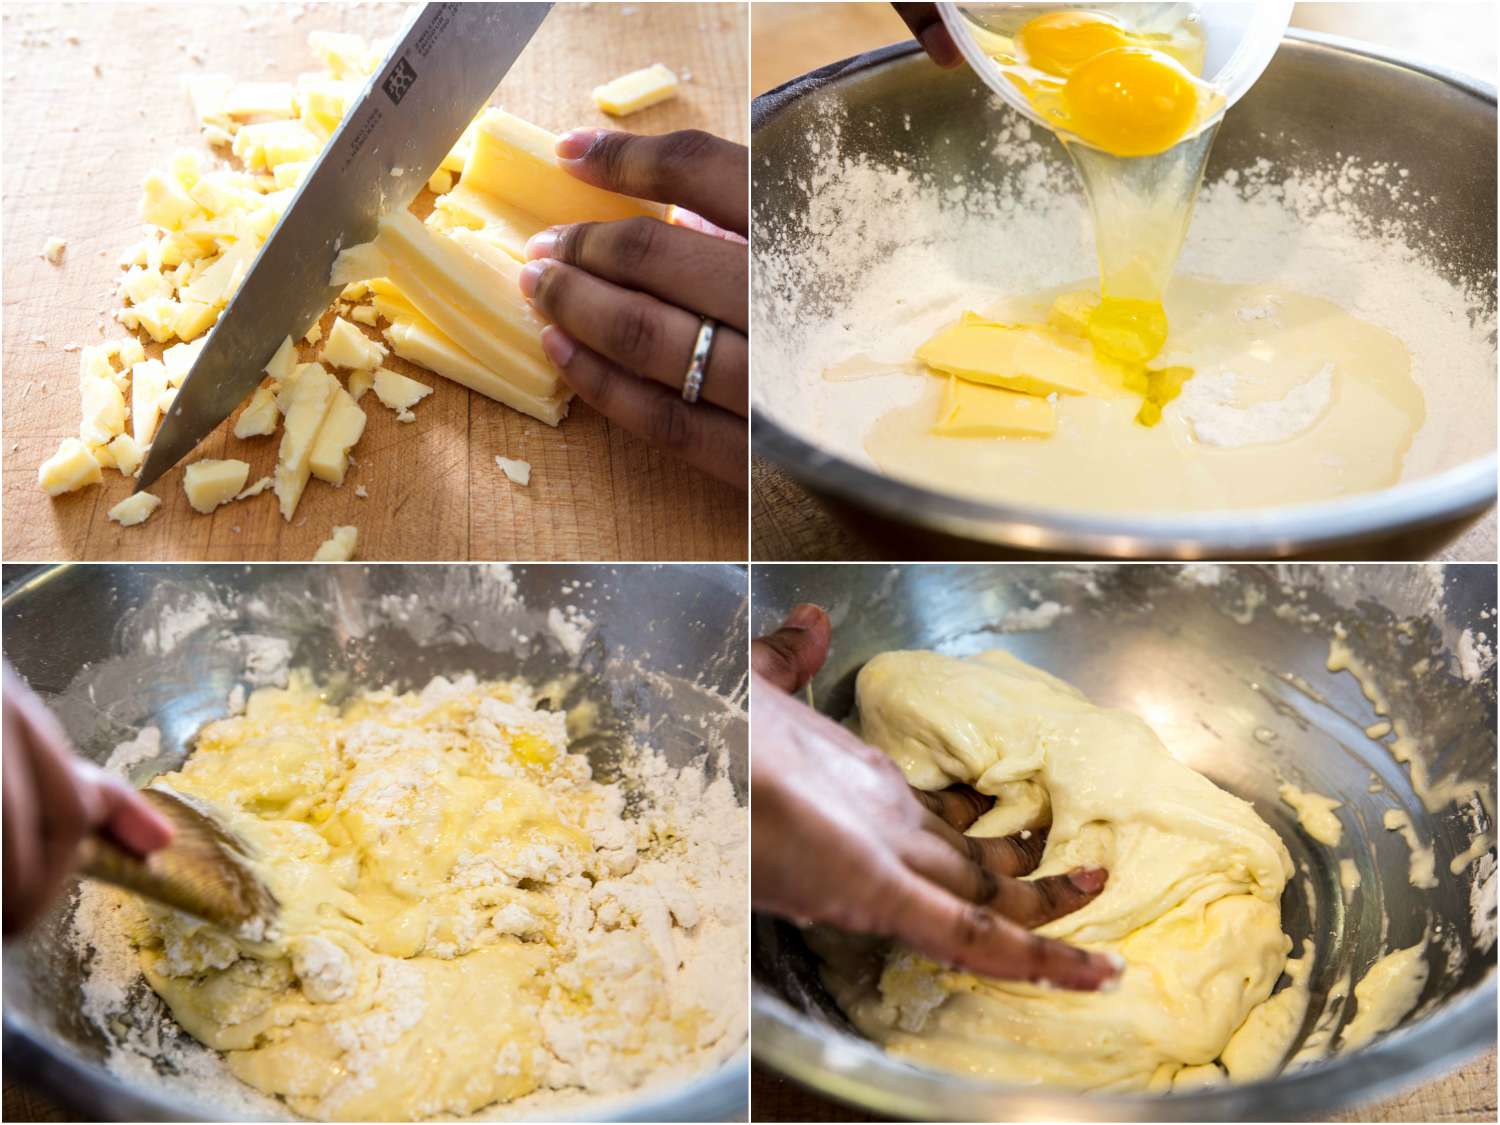 20171102-cunapes-cheesy-bread-vicky-wasik-mixing-dough.jpg